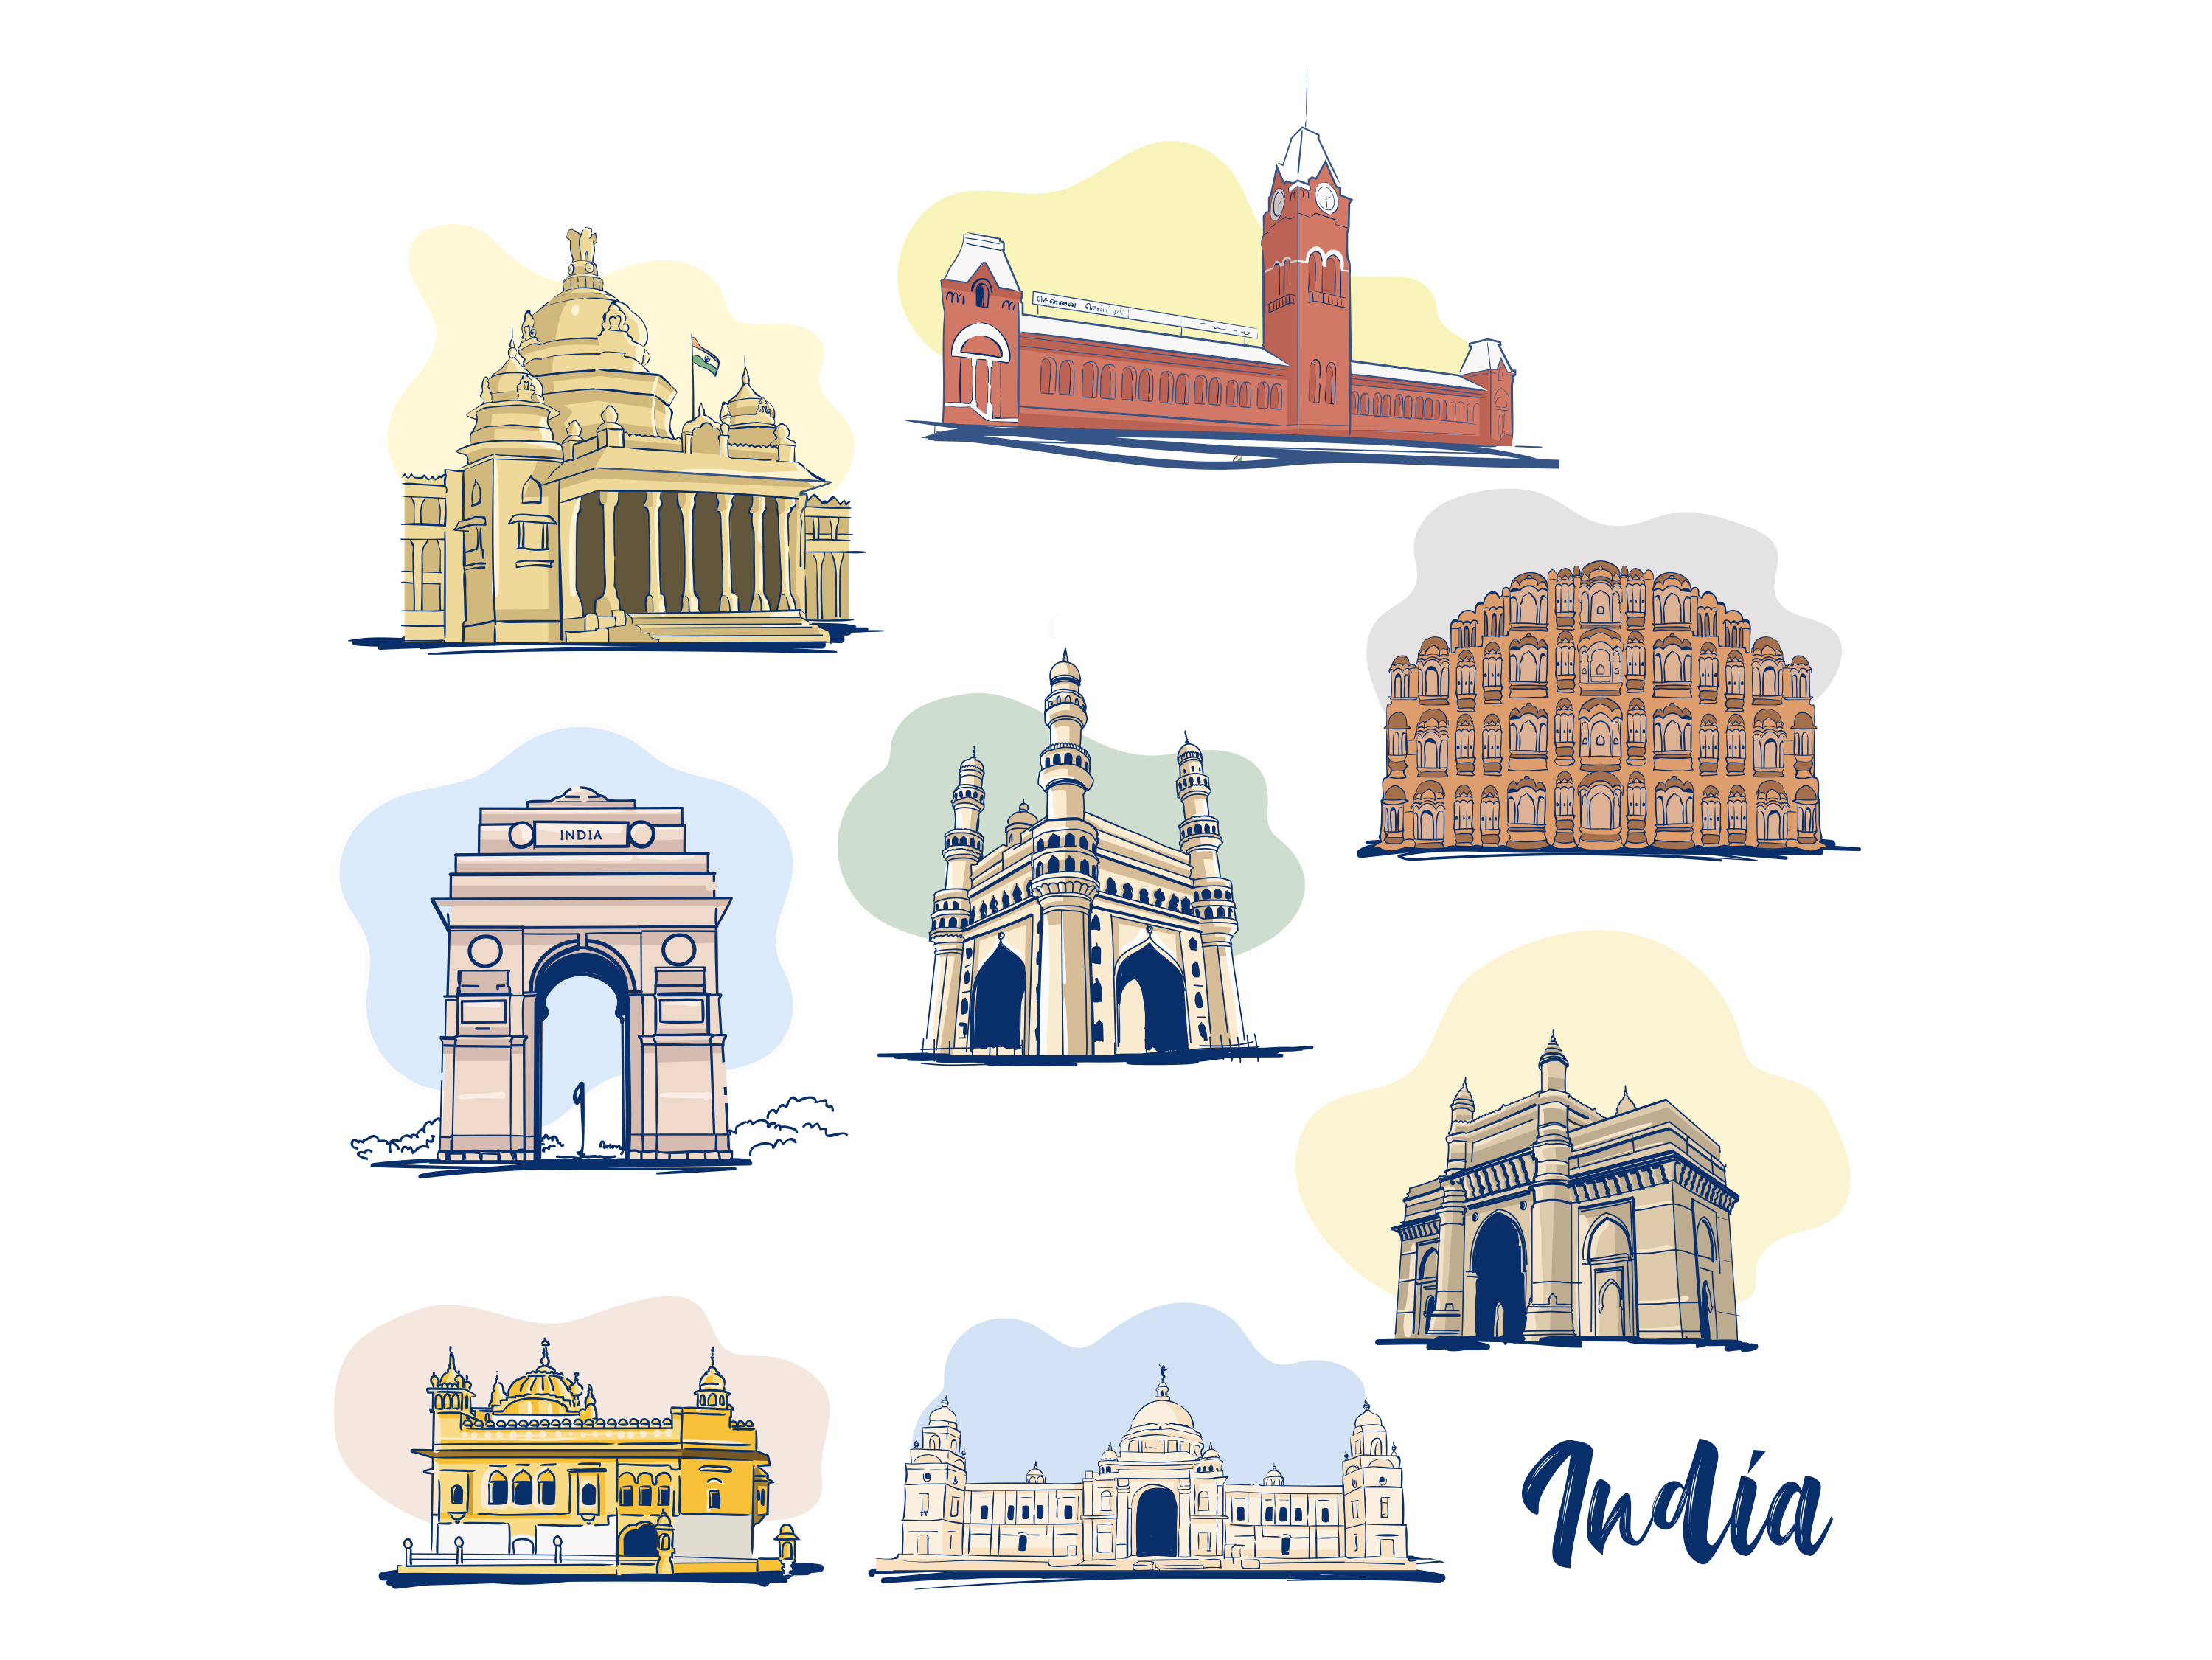 Indian famous monuments sketch Qutub Minar Lotus Temple India Gate and  Taj Mahal with flying pigeons on grey rays background  Stock Image   Everypixel